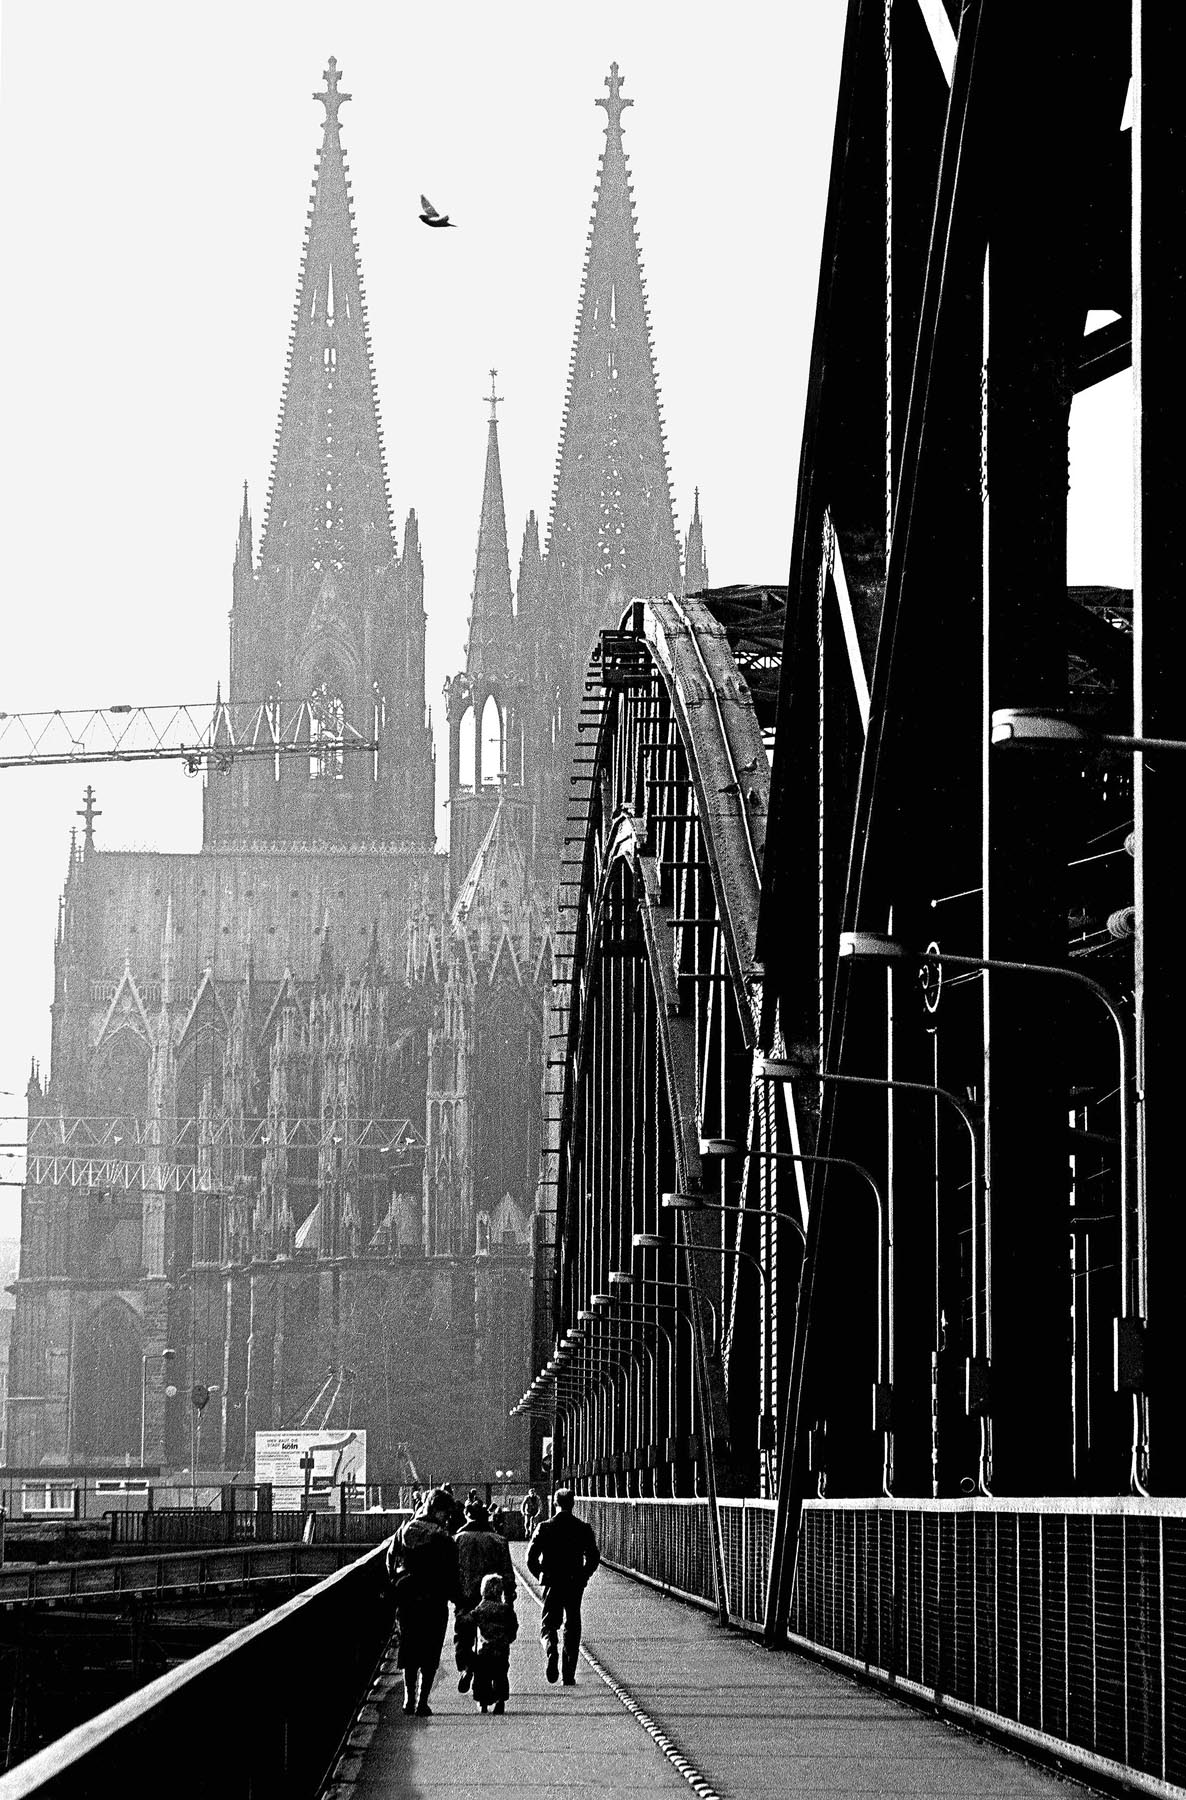 Koln Cathedral and the bridge